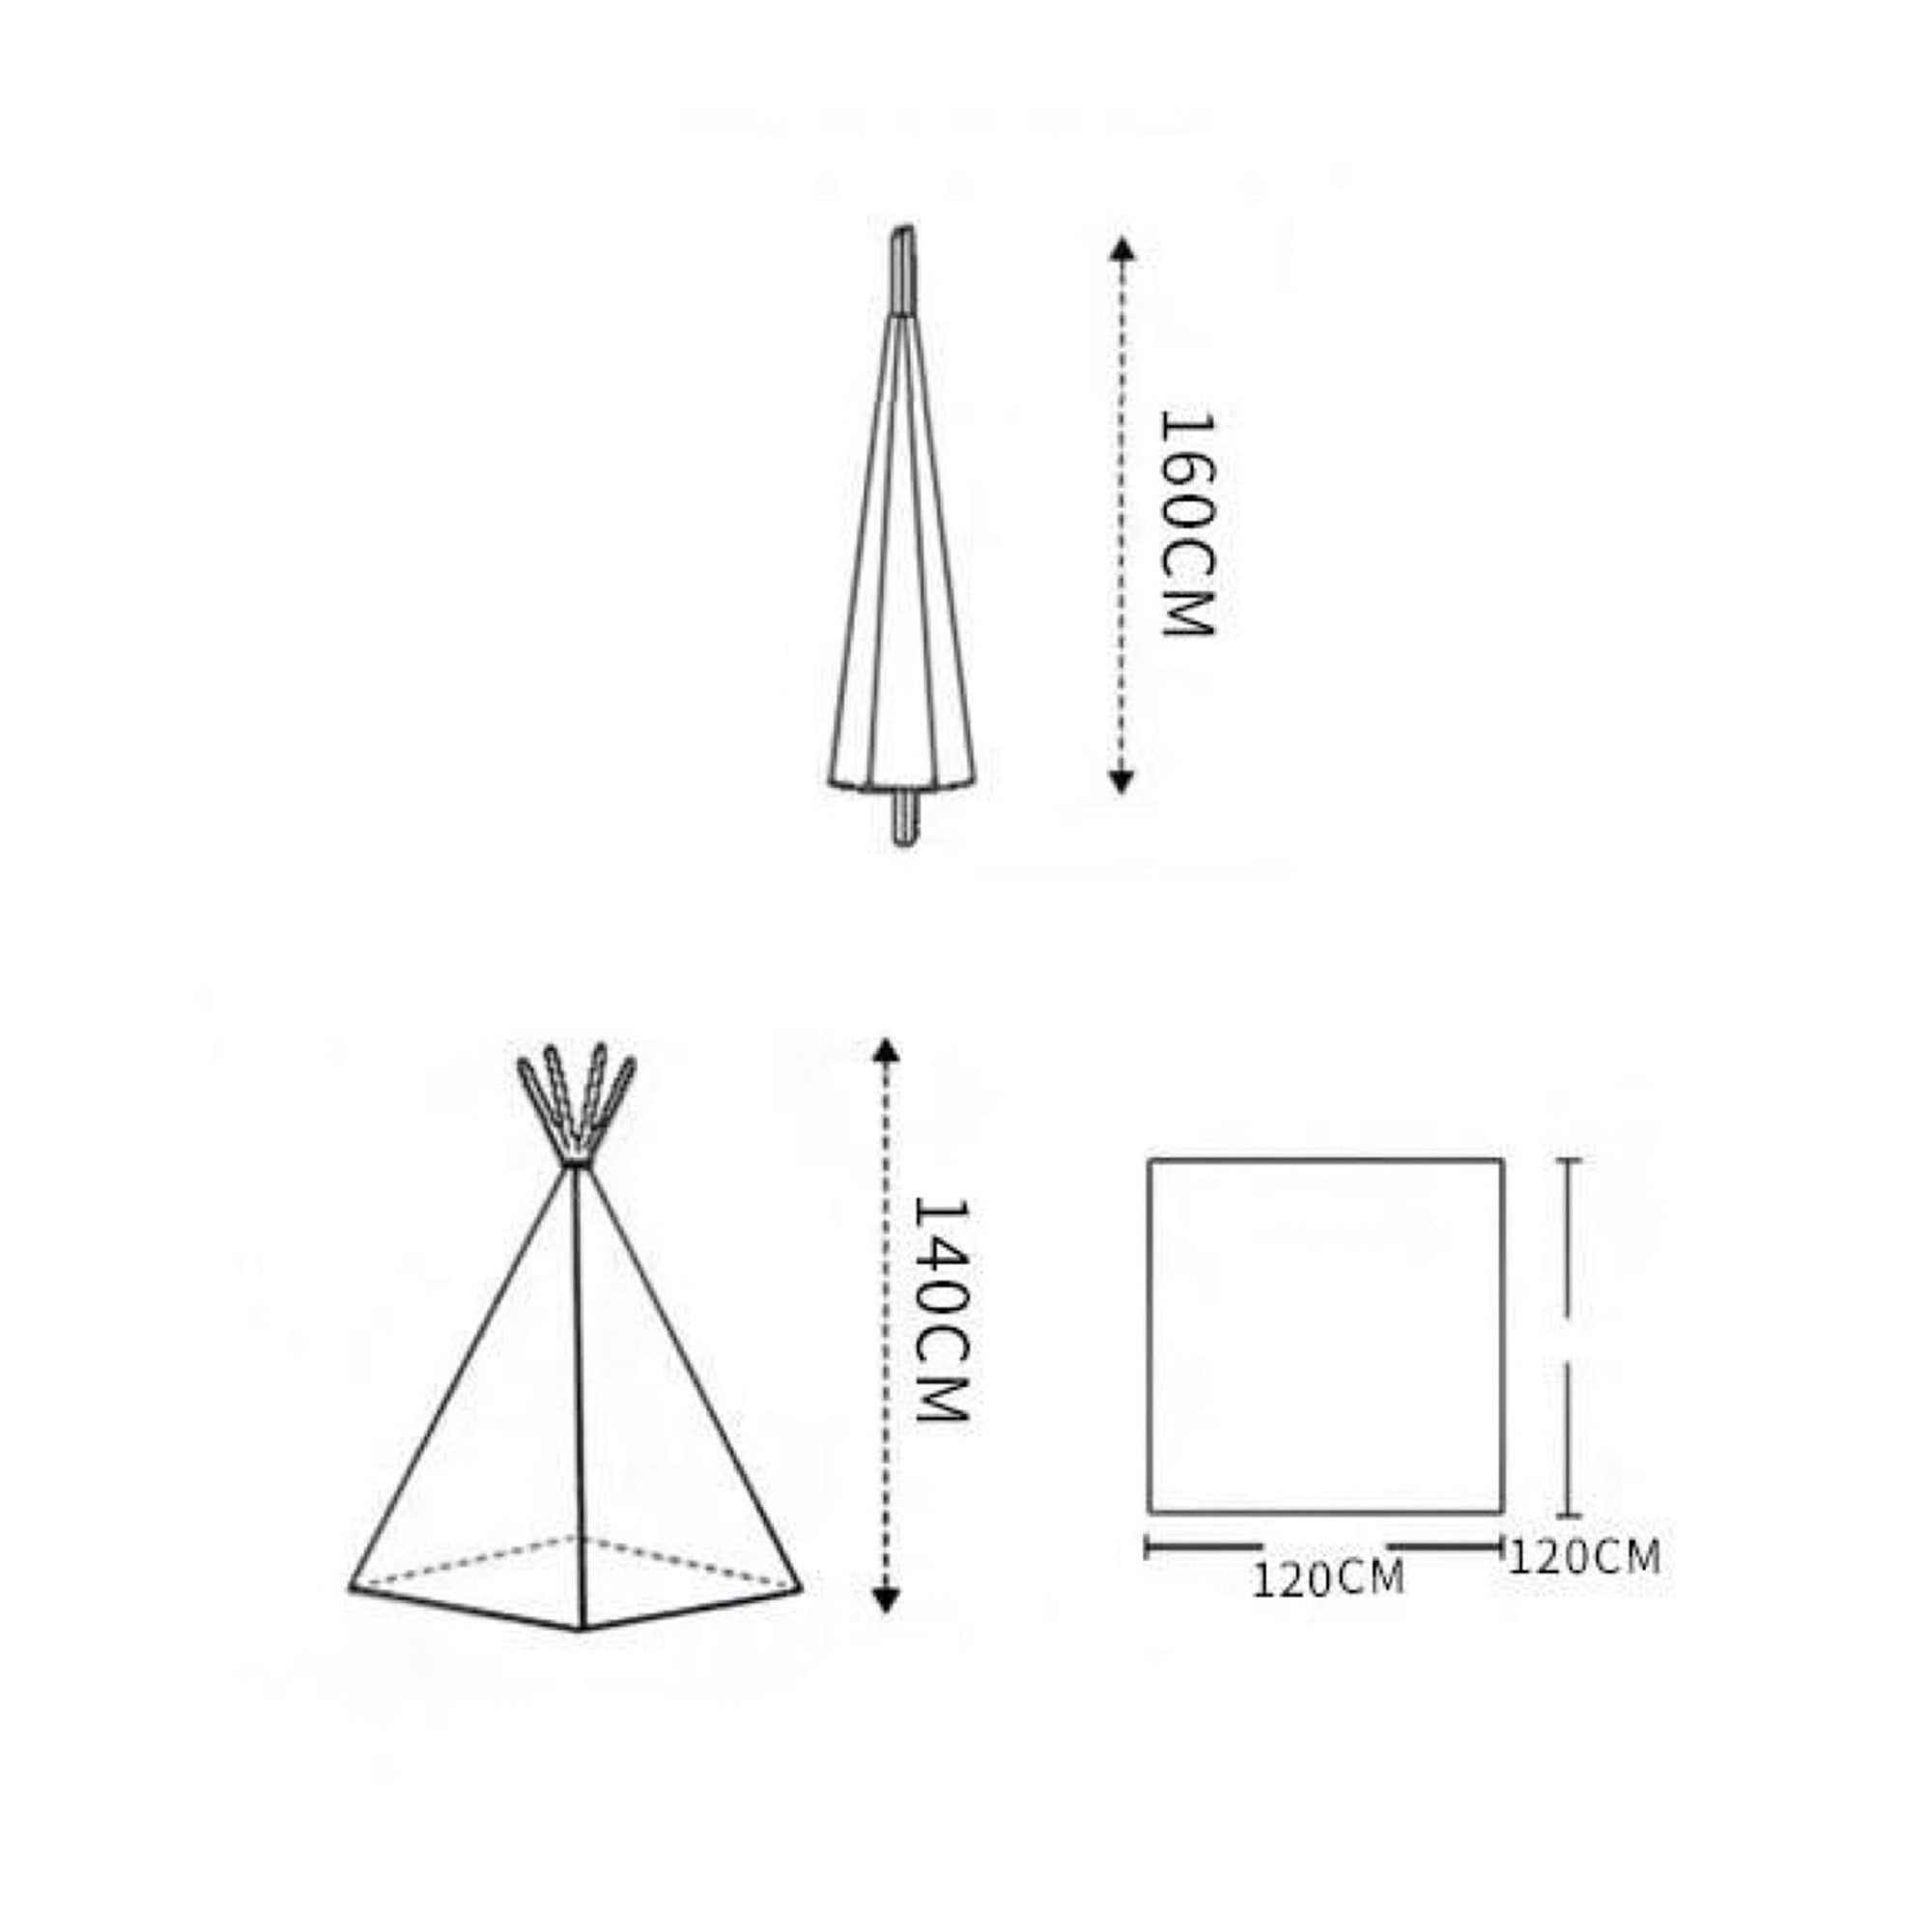 Large Foldable Kids Canvas Teepee Play Tent With Lights ( Black & White )